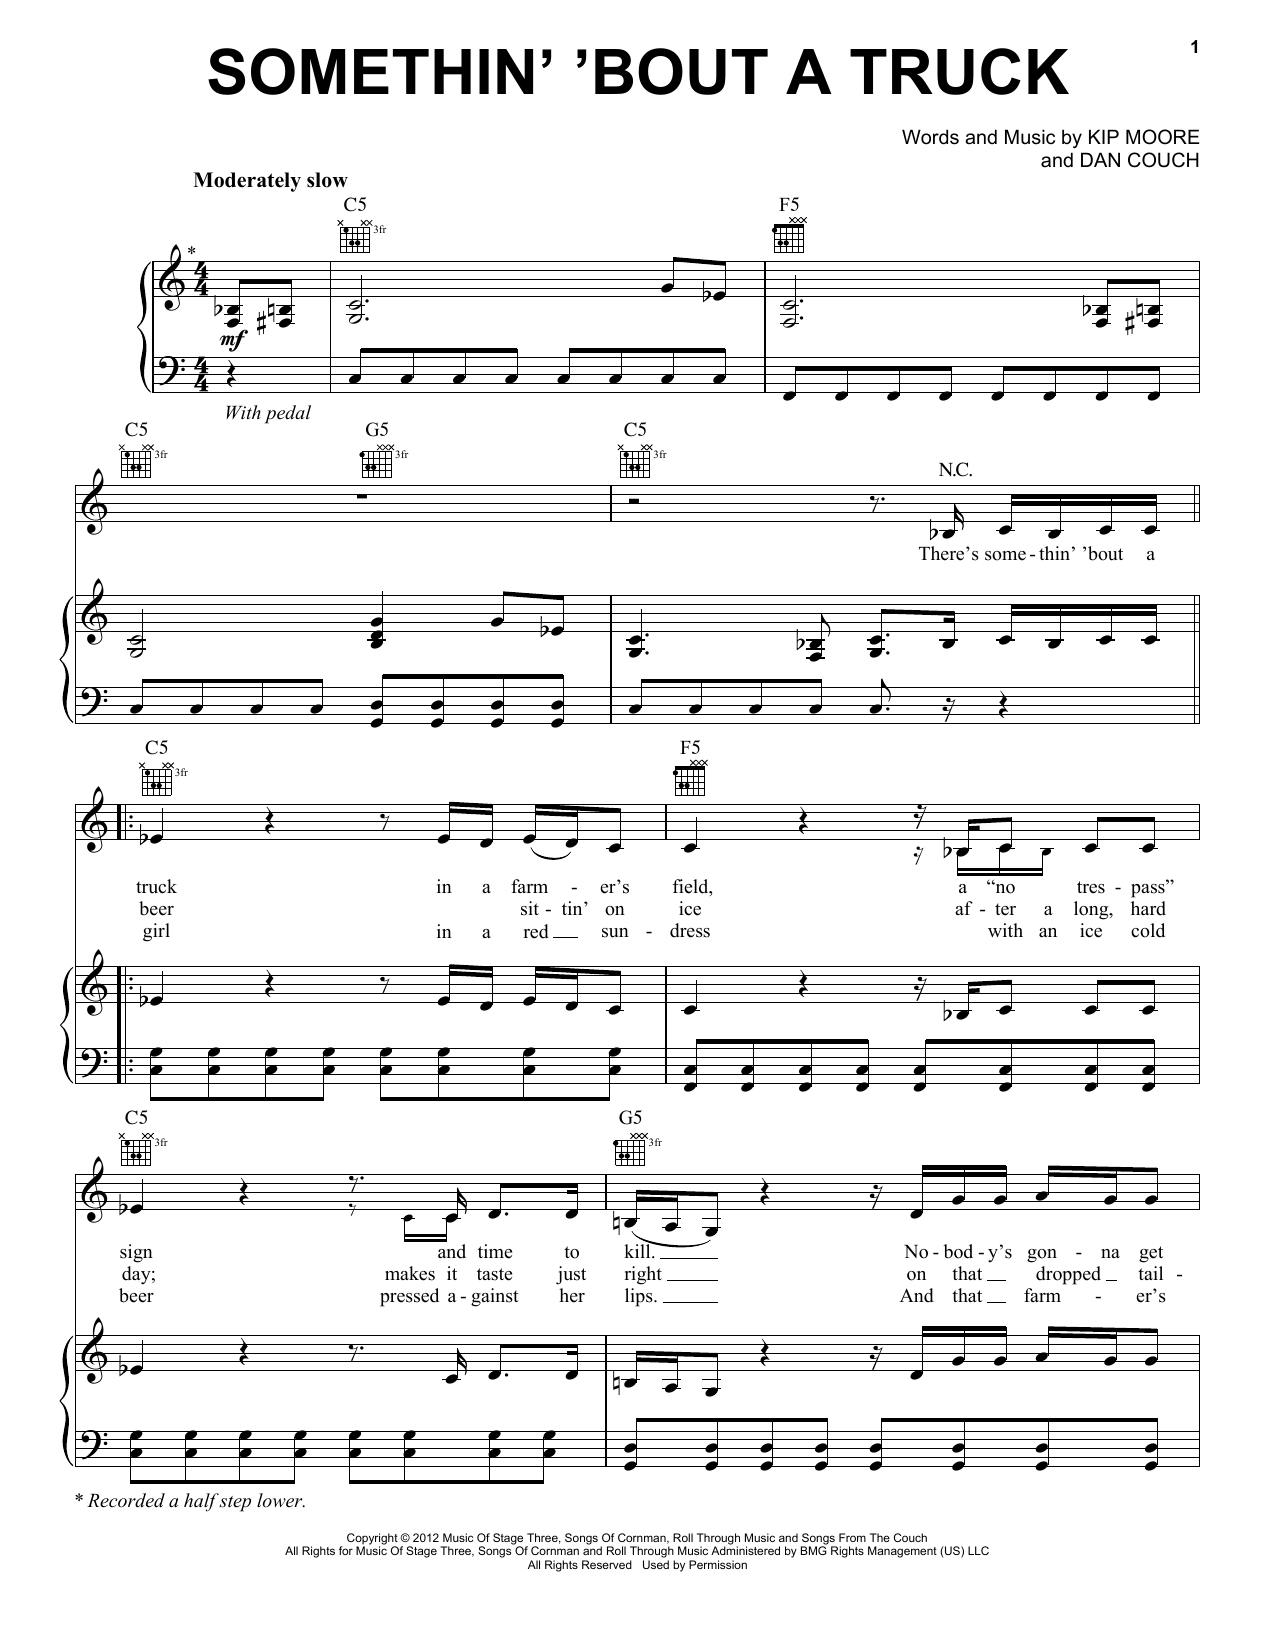 Download Kip Moore Somethin' 'Bout A Truck Sheet Music